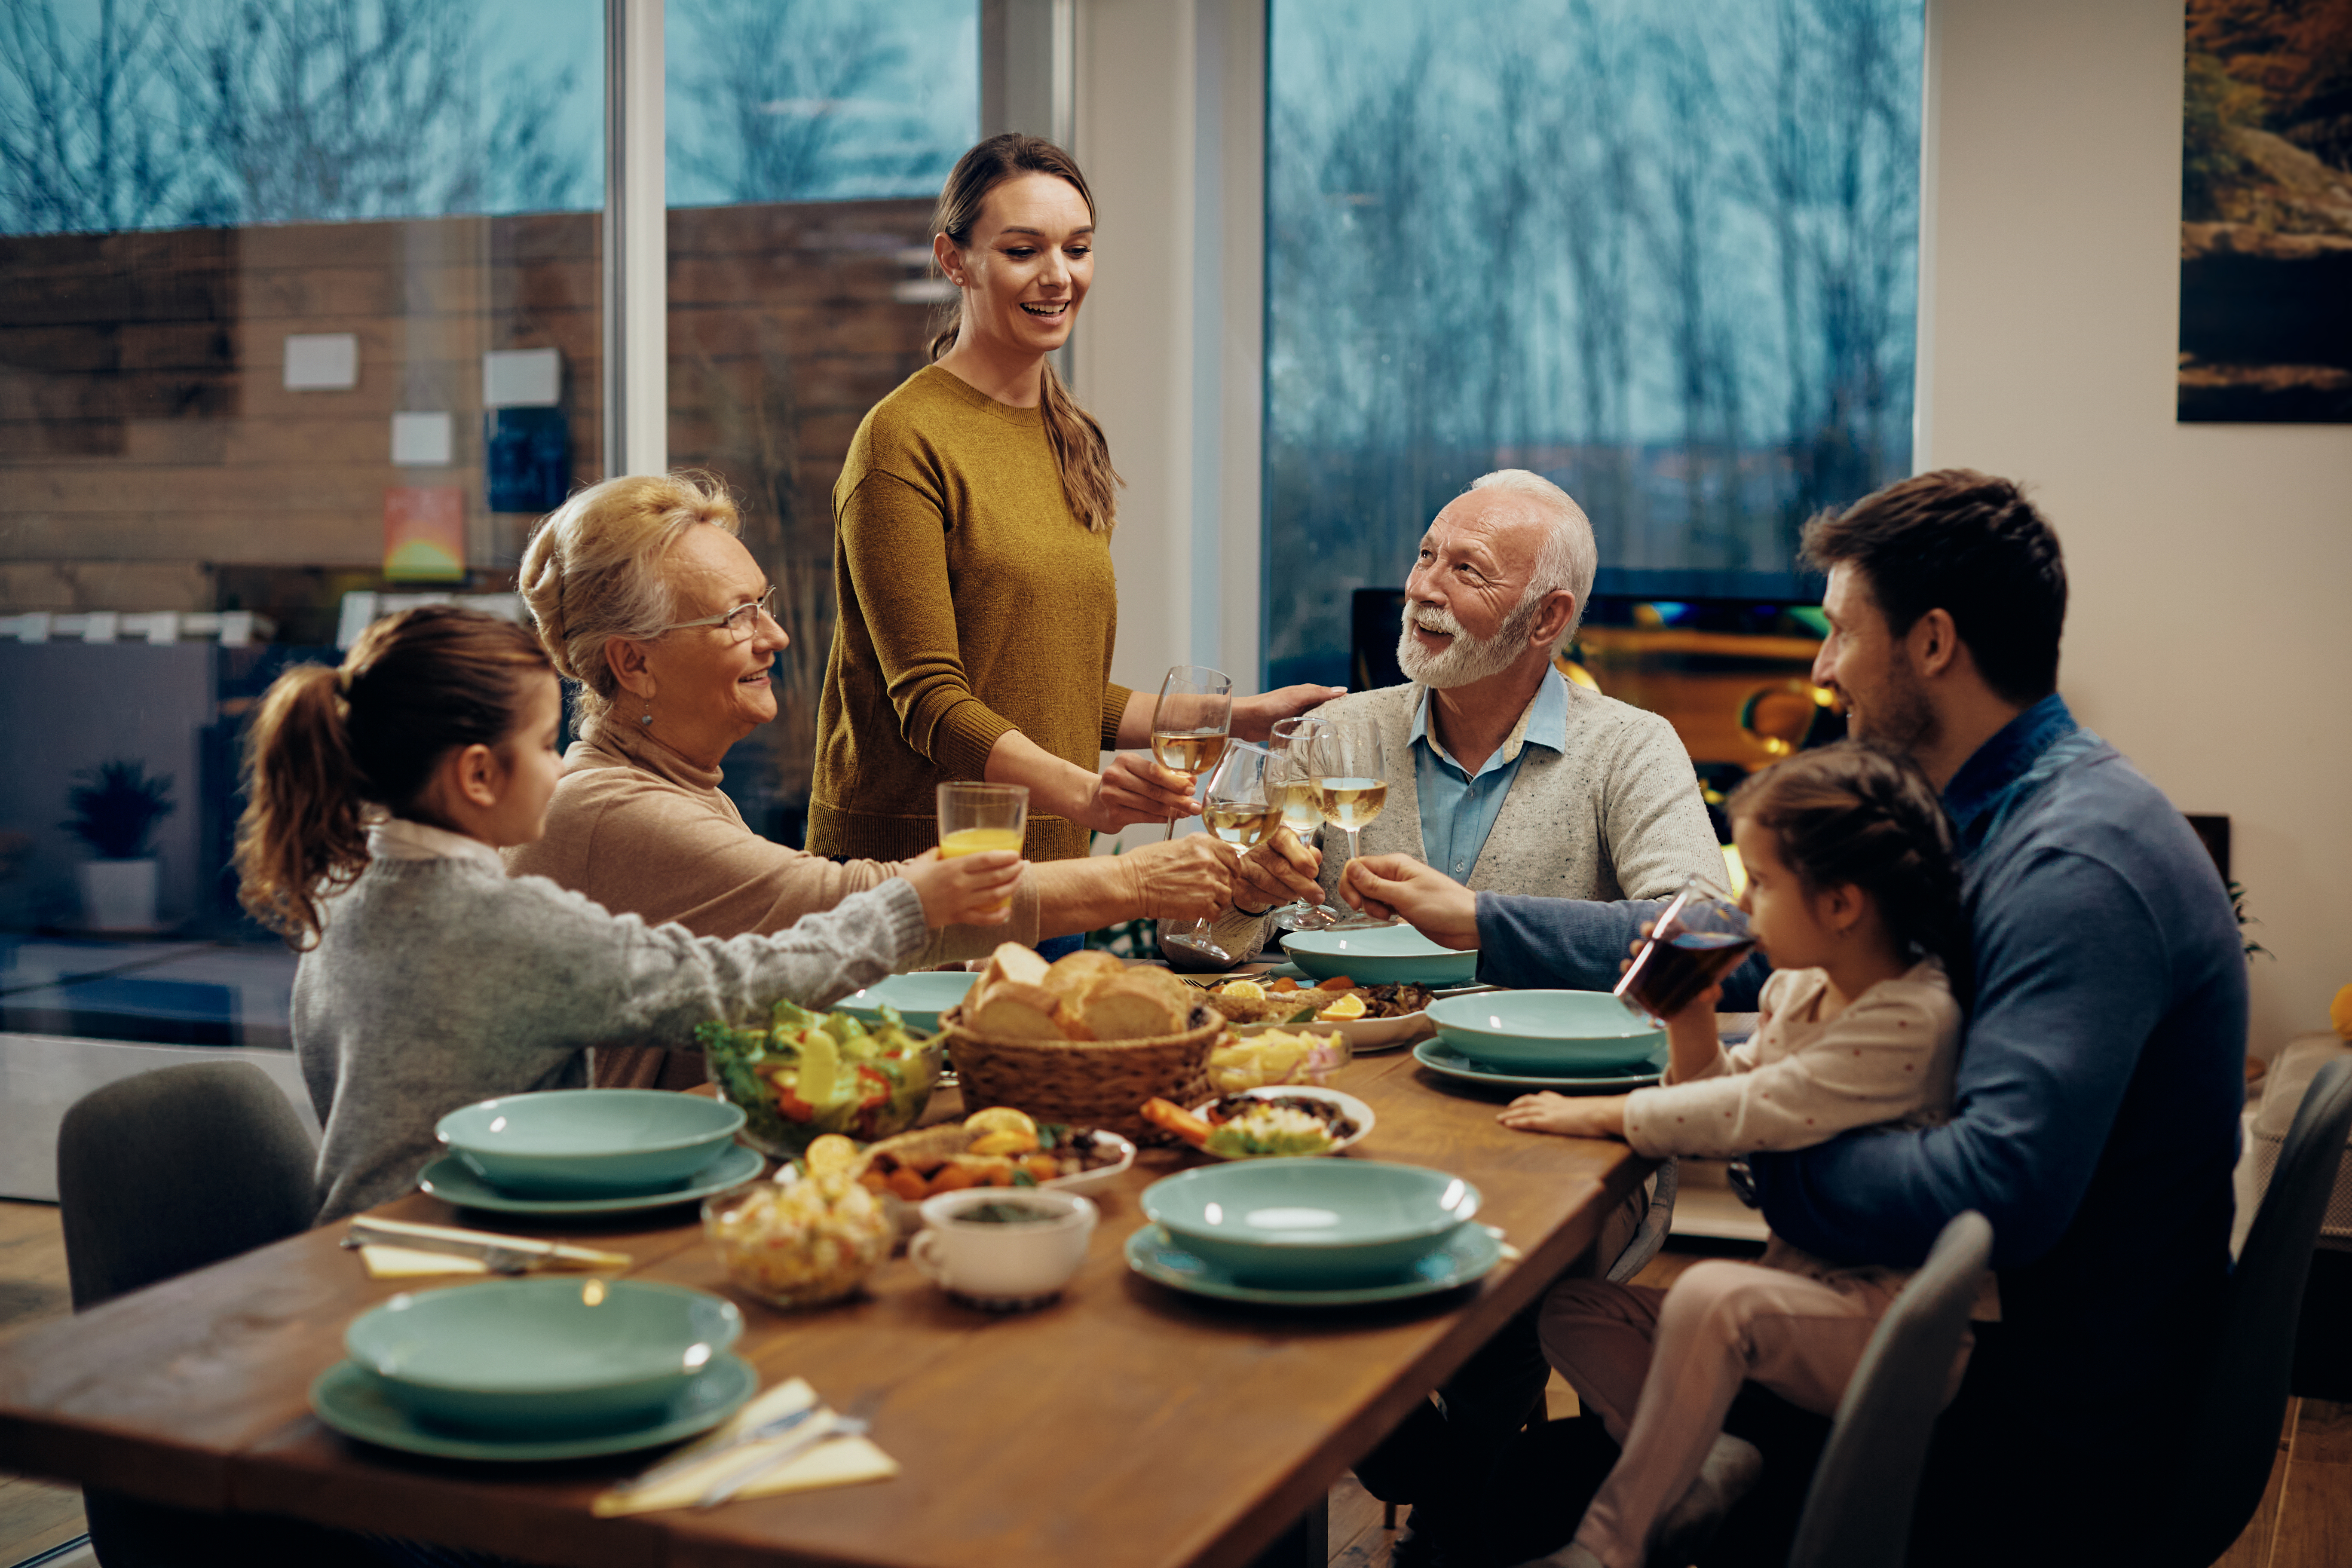 A happy extended family toasting while having dinner | Source: Shutterstock